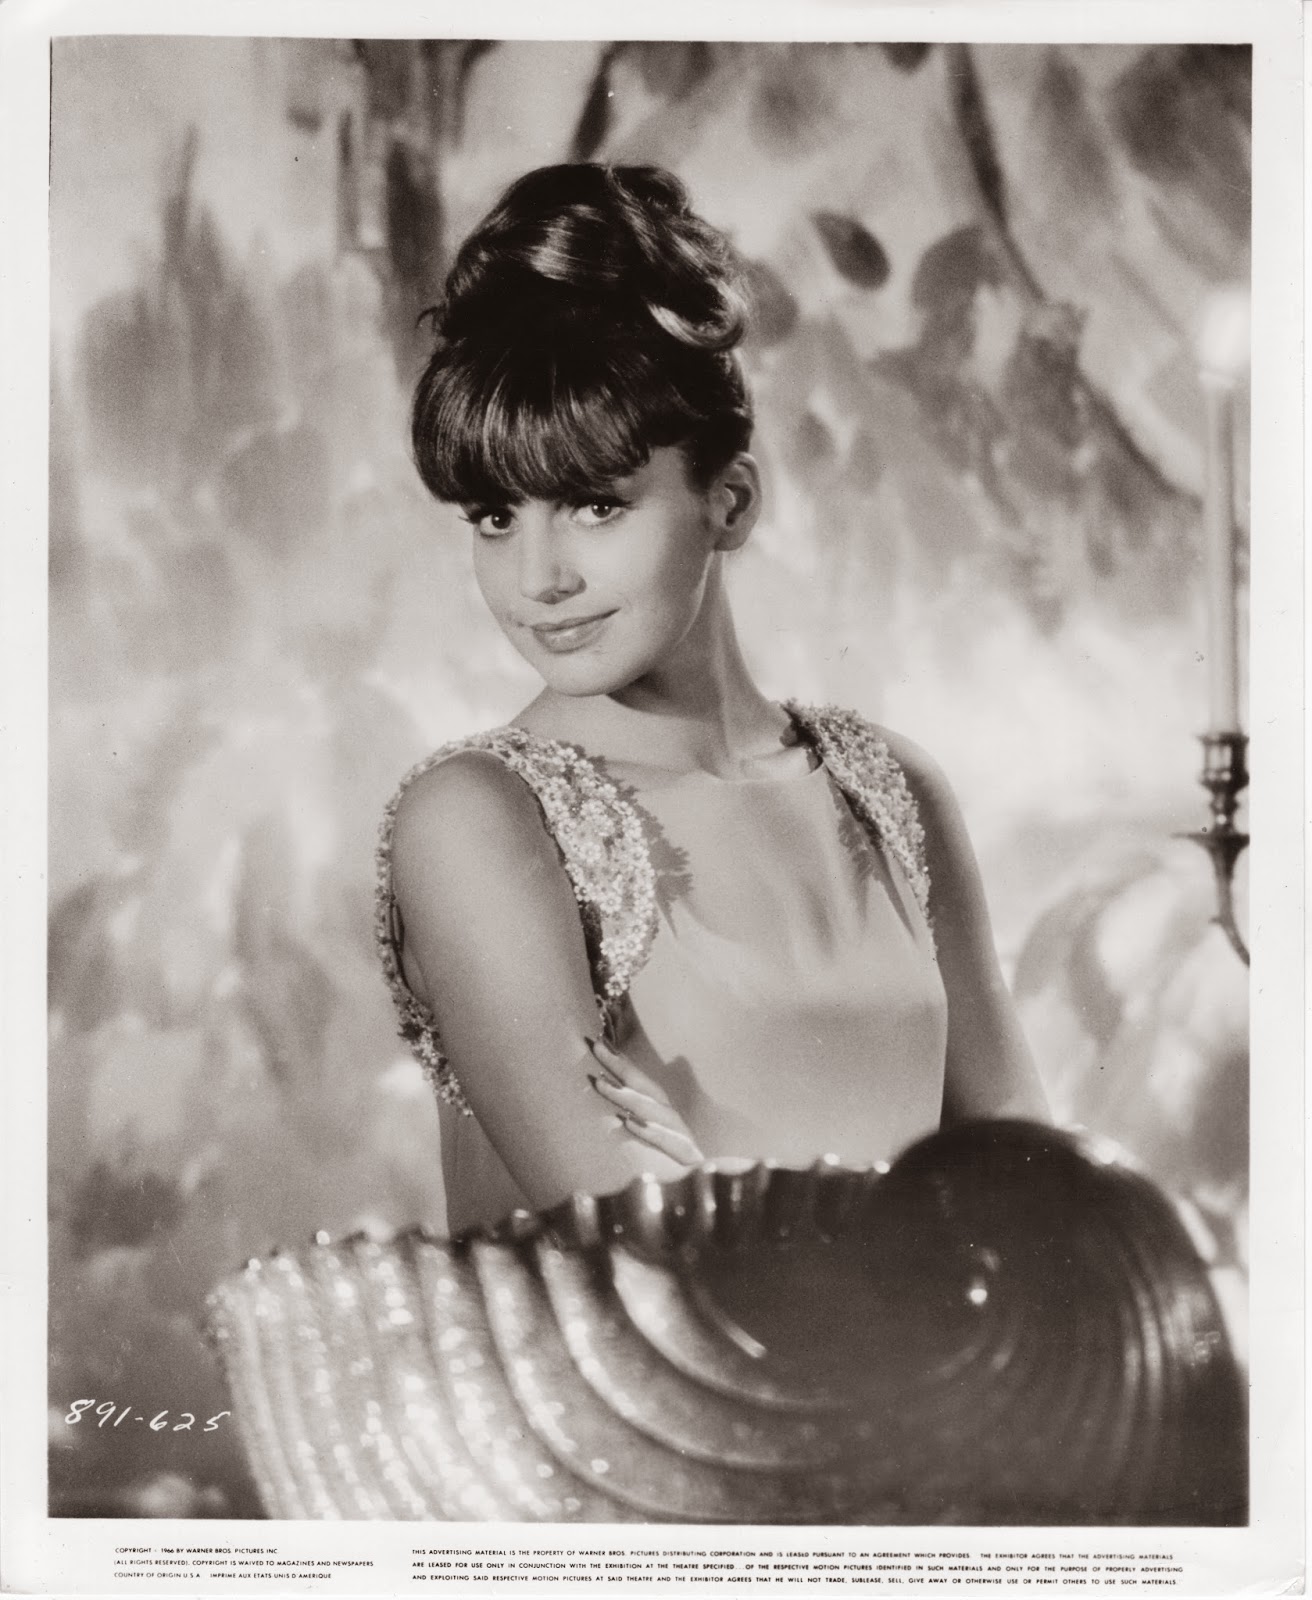 Slice of Cheesecake: Catherine Spaak, pictorial